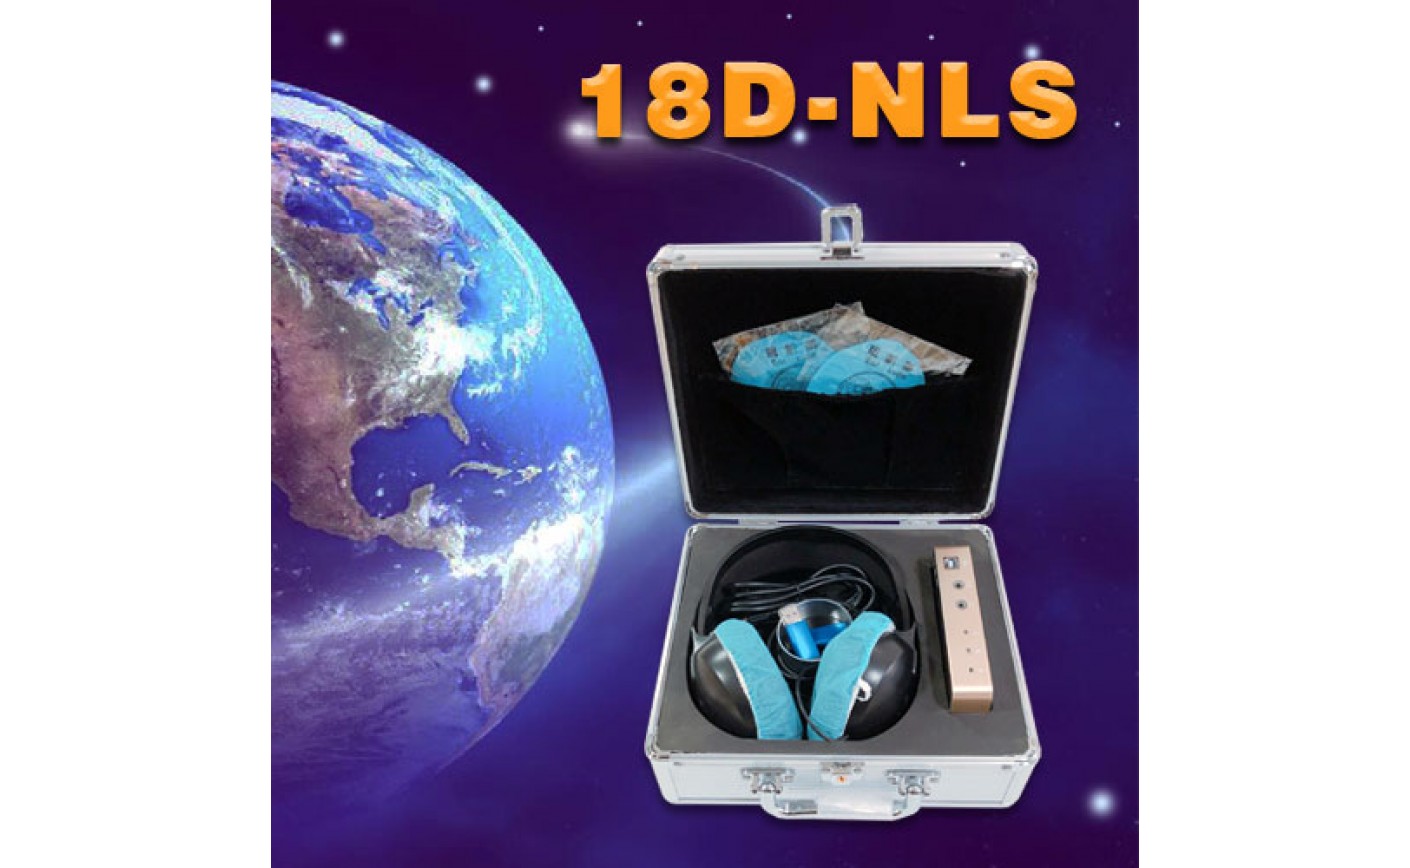 The 3D Interface Of 18D-NLS